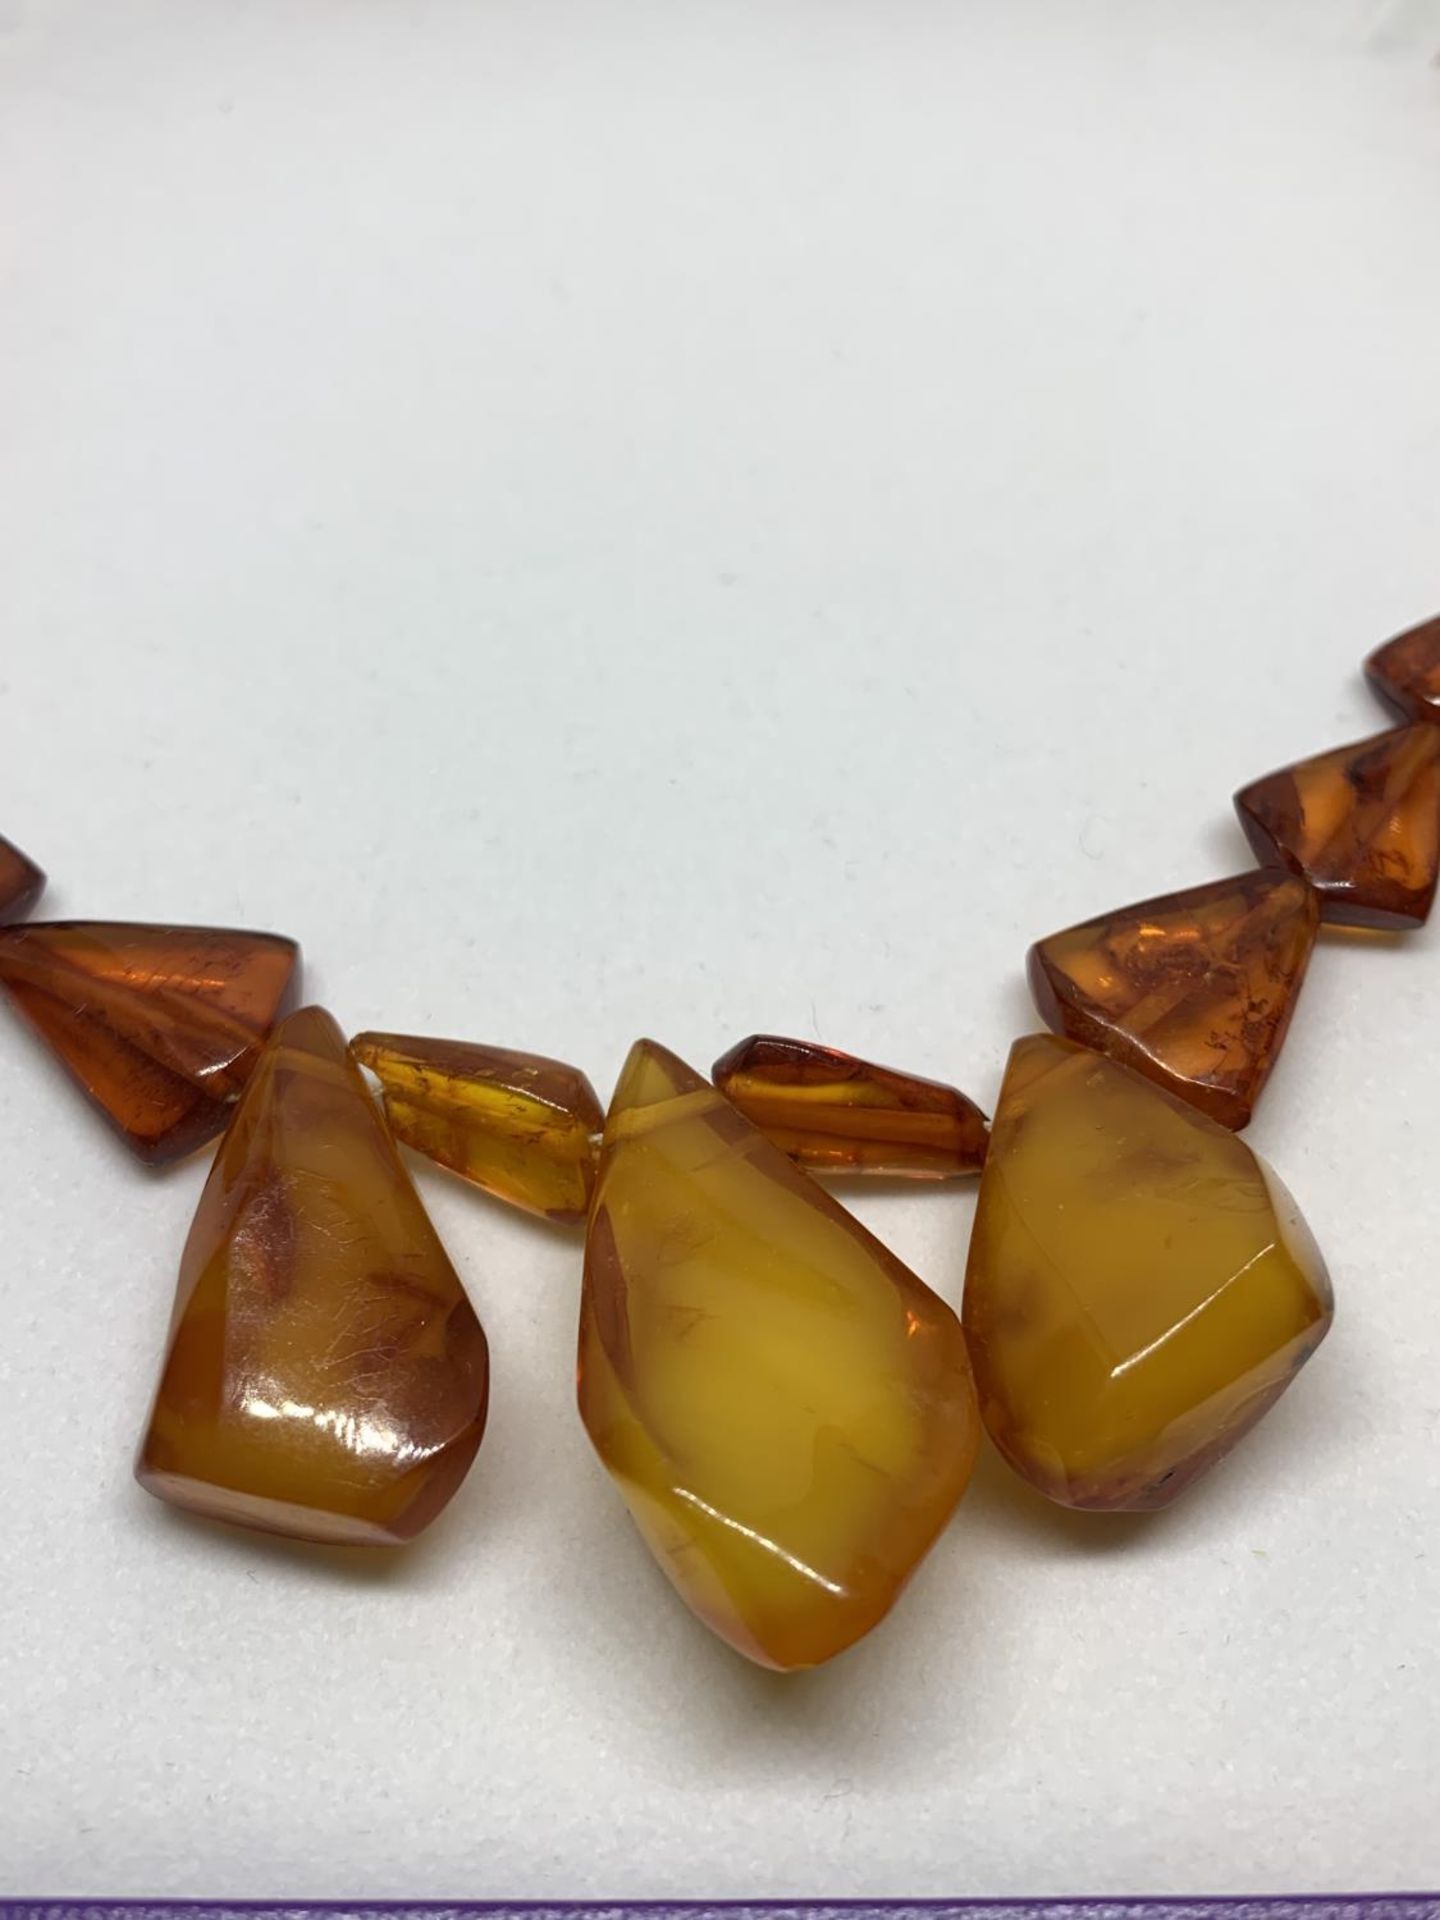 AN AMBER NECKLACE IN A PRESENTATION BOX - Image 2 of 2